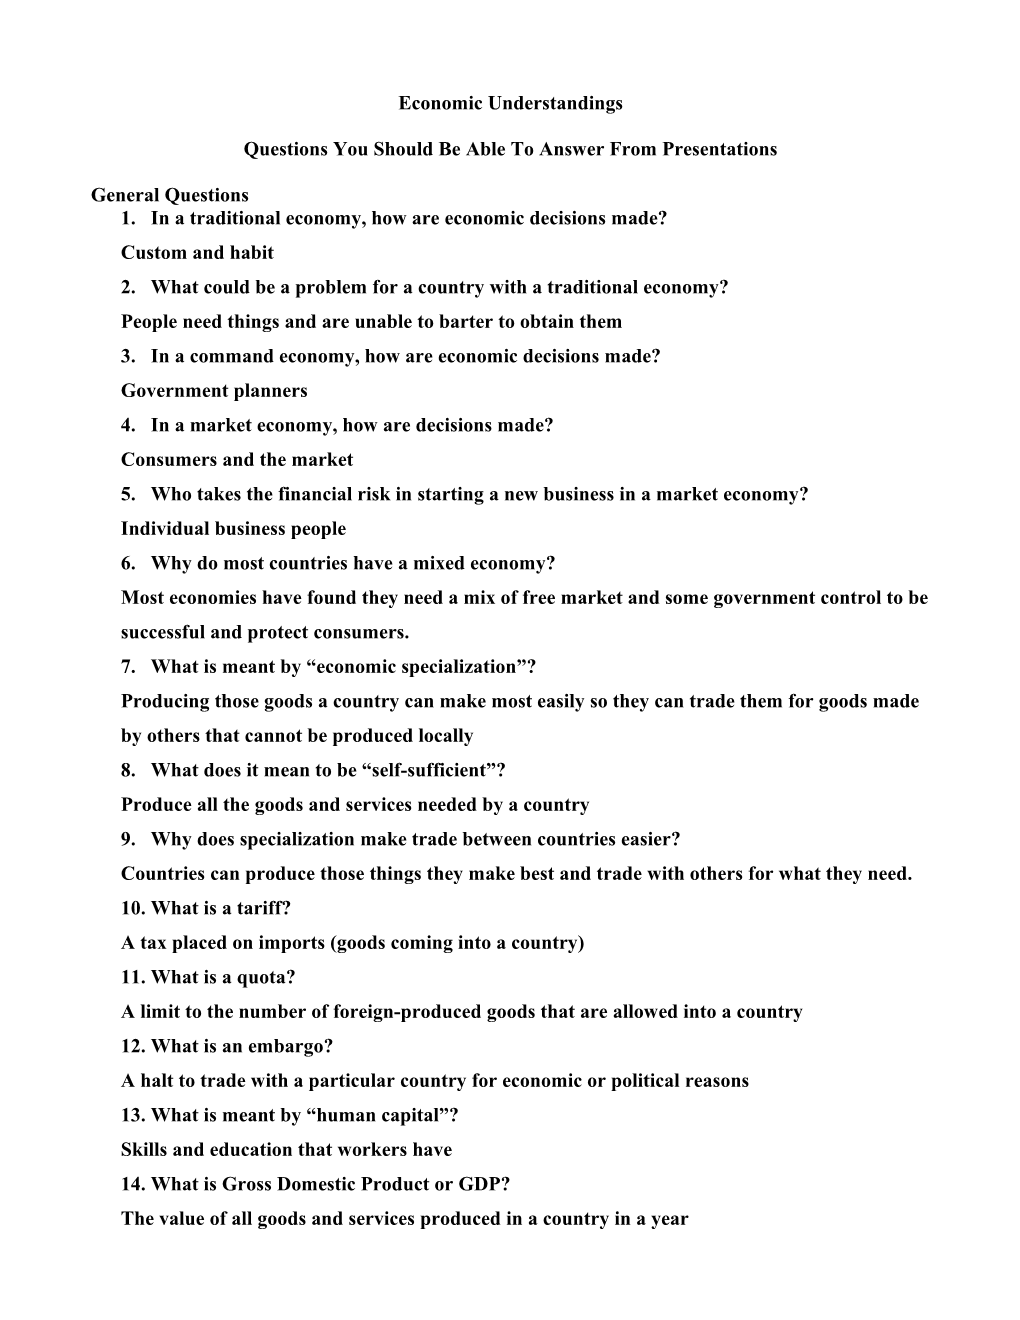 Questions You Should Be Able to Answer from Presentations